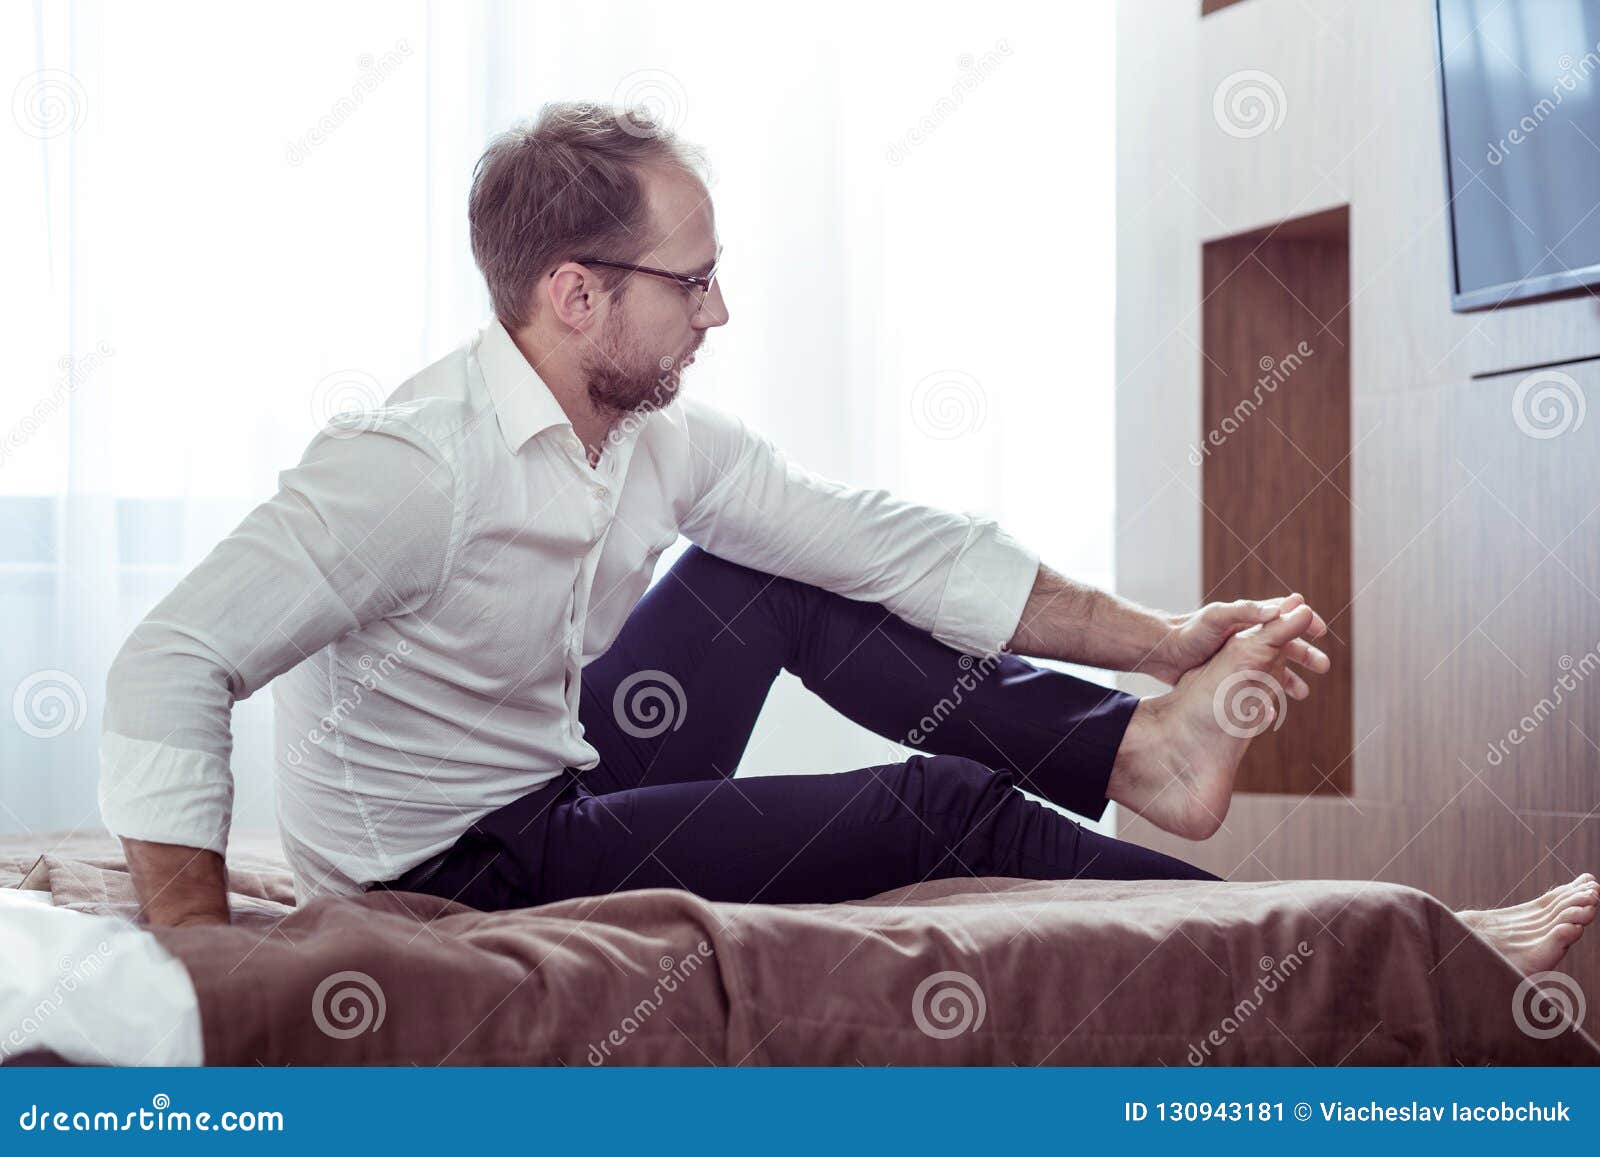 Tired Businessman Making Feet Massage After All Day Working Stock Image